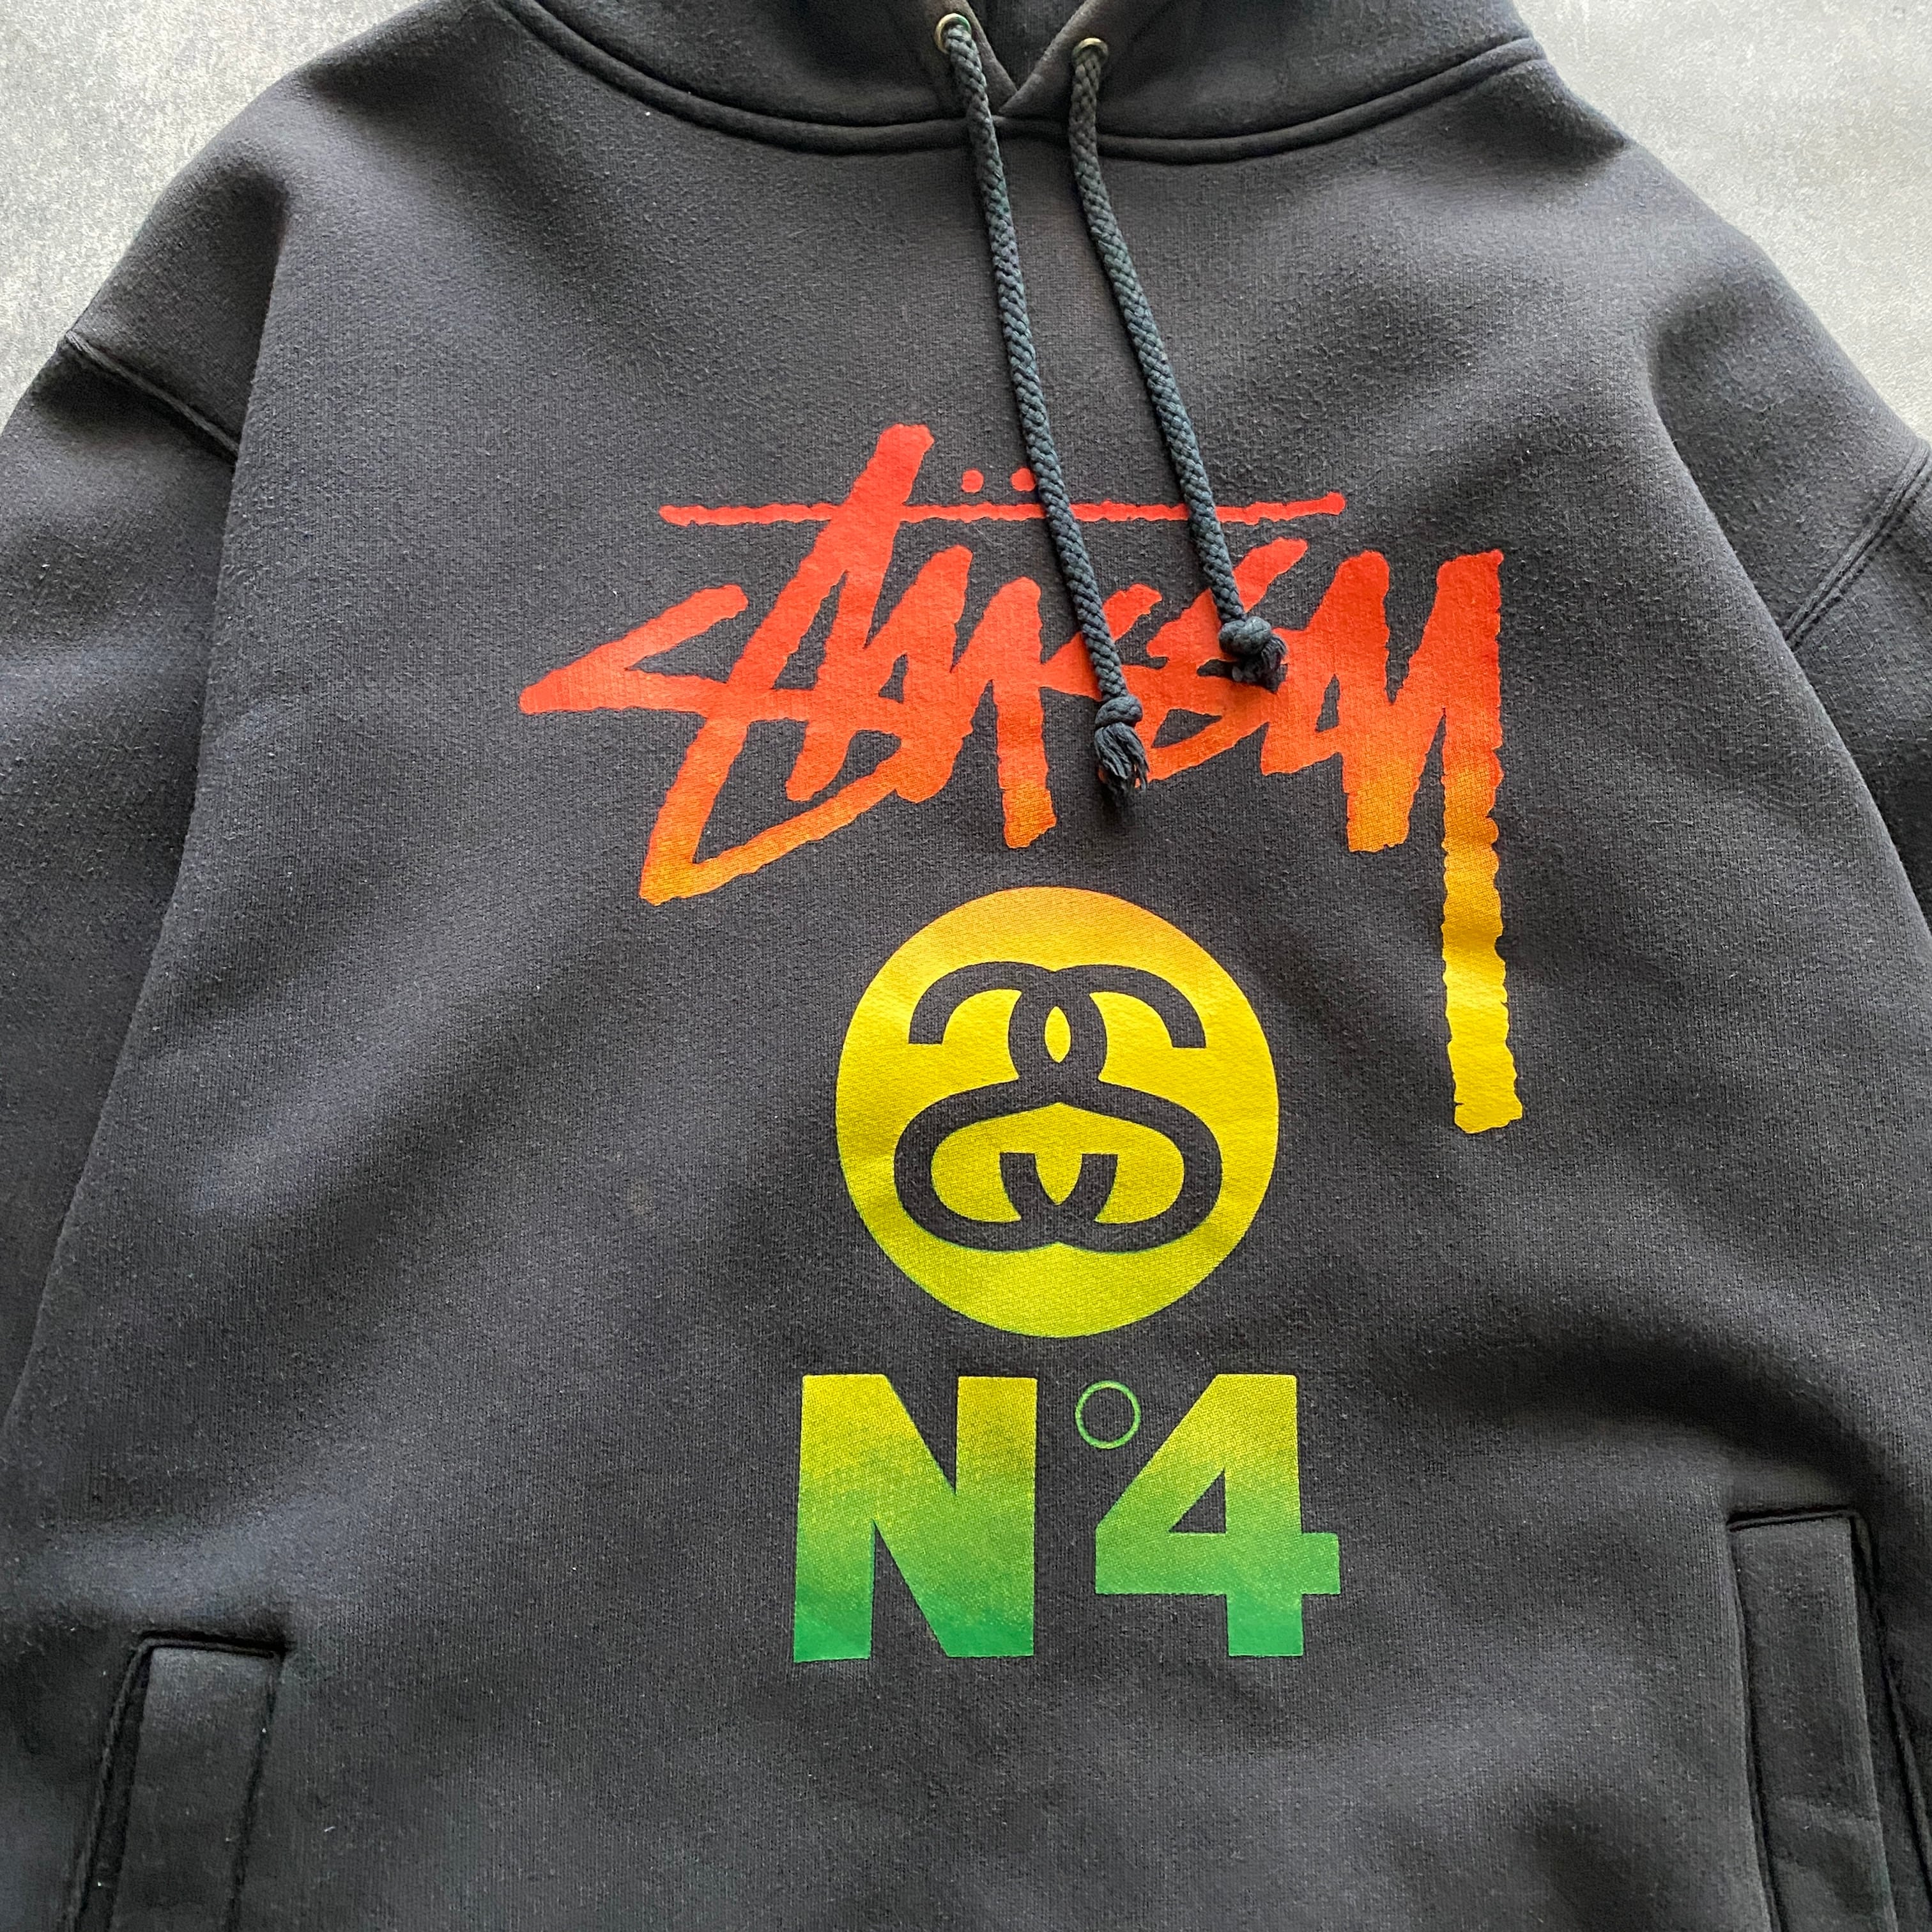 90's old stussy ステューシー N°4×Sリンク ラスタカラー プリントロゴ ...